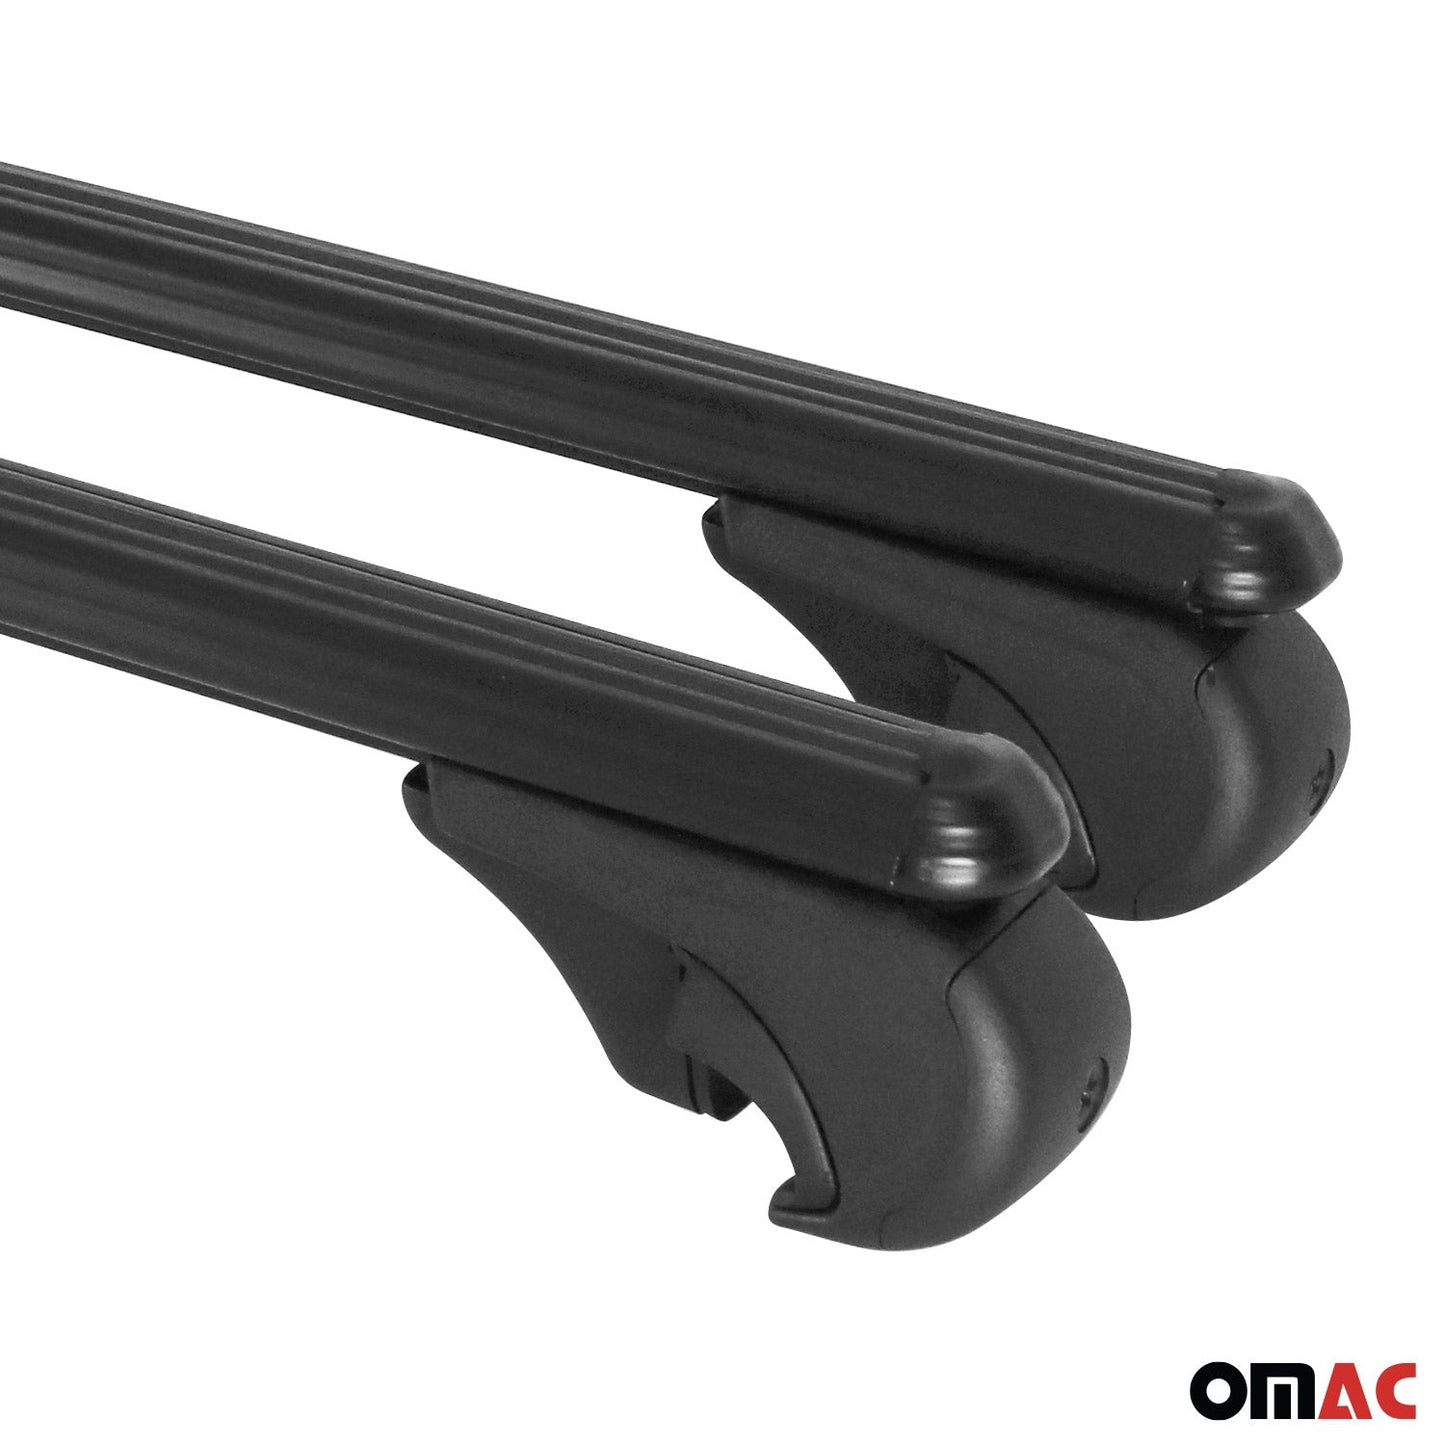 OMAC Roof Rack Cross Bars Luggage Carrier Black Set for BMW X5 2000-2006 12239696929XLB